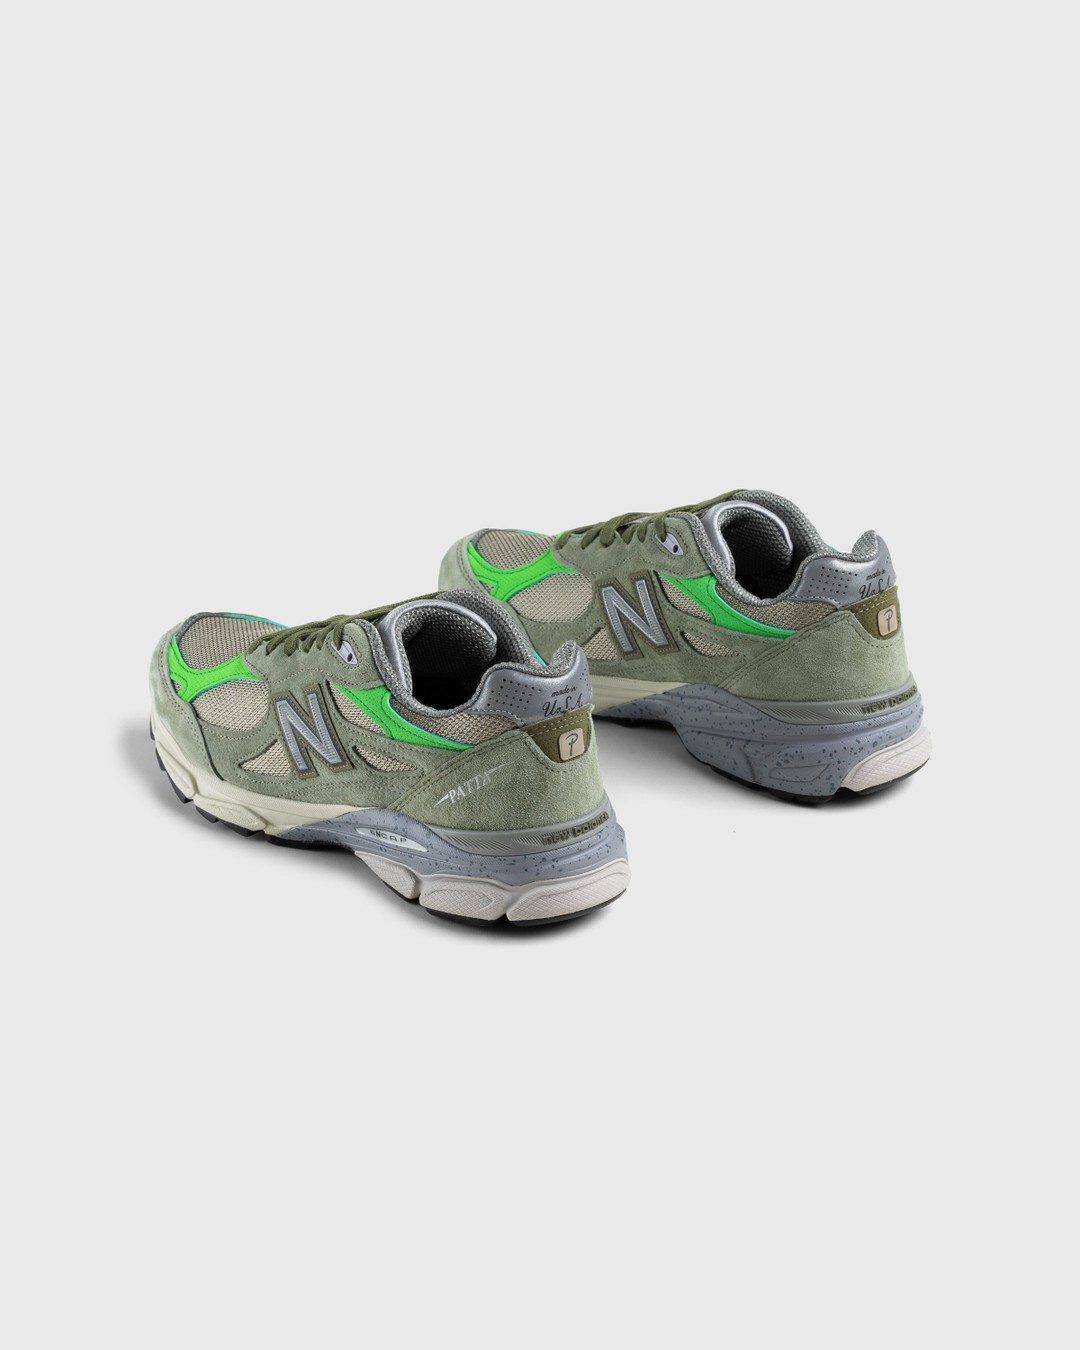 Patta x New Balance – M990PP3 Made in USA 990v3 Olive/White Pepper - Sneakers - Green - Image 2